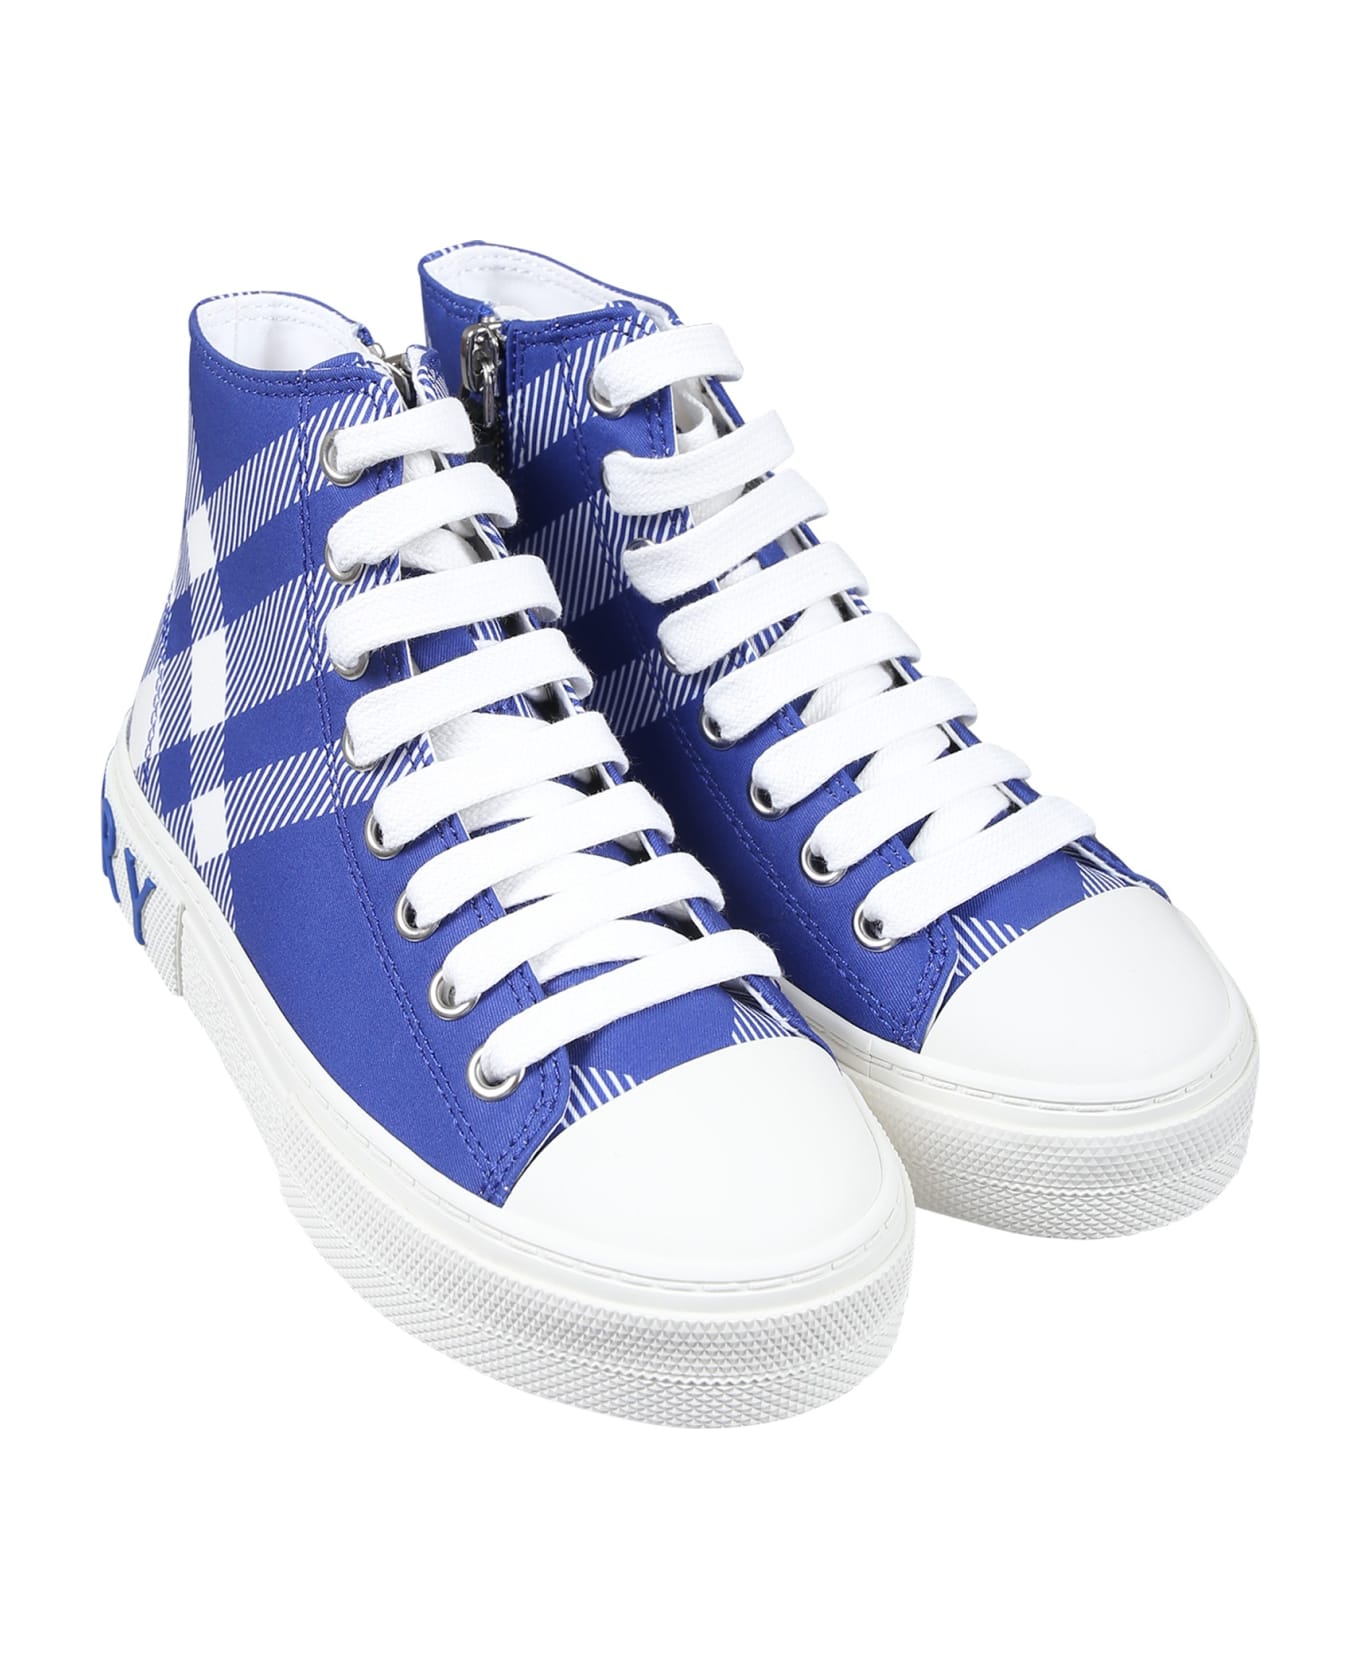 Burberry Blue Sneakers For Kids With Logo - Blue シューズ